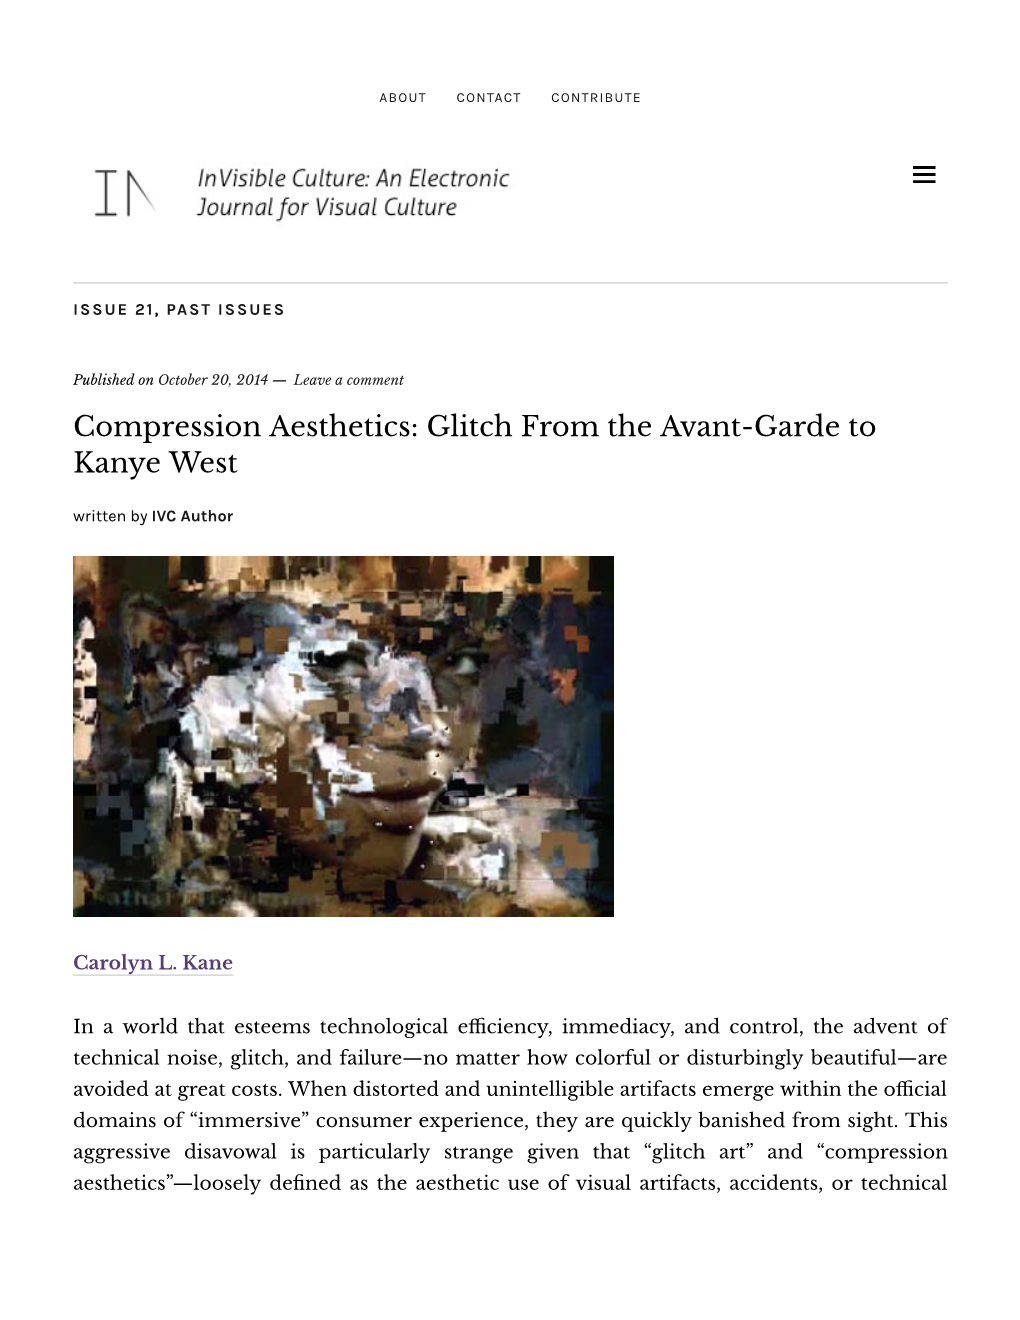 Compression Aesthetics: Glitch from the Avant-Garde to Kanye West Written by IVC Author